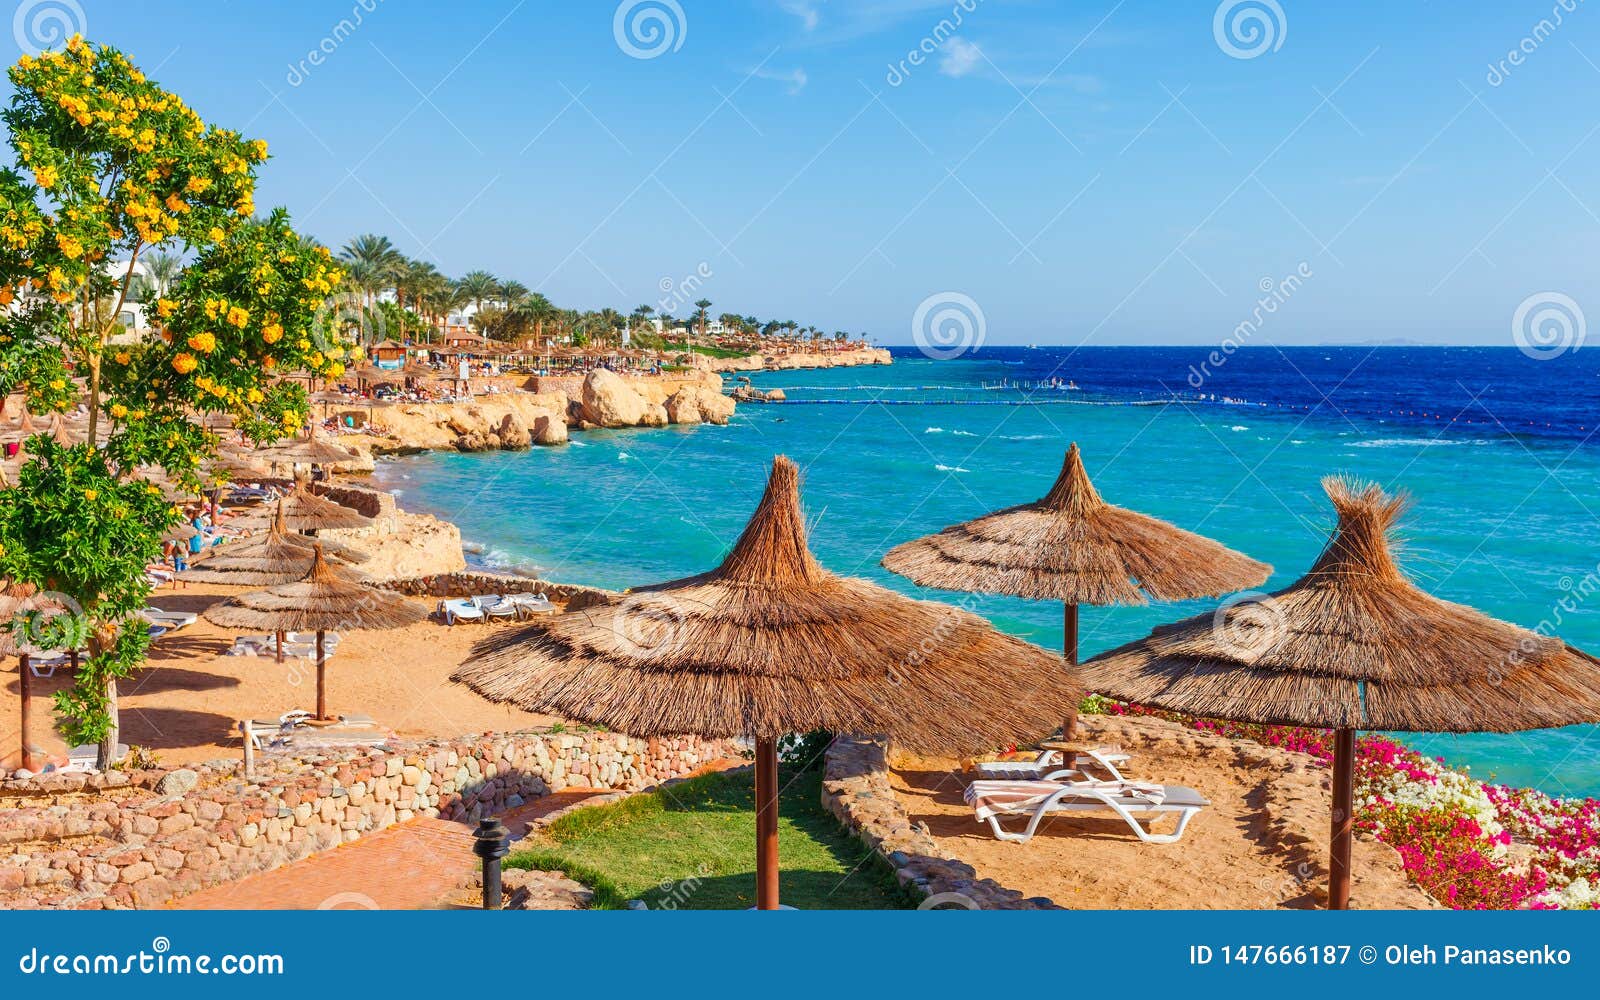 sunny resort beach with palm tree at the coast shore of red sea in sharm el sheikh, sinai, egypt, asia in summer hot. bright sunny